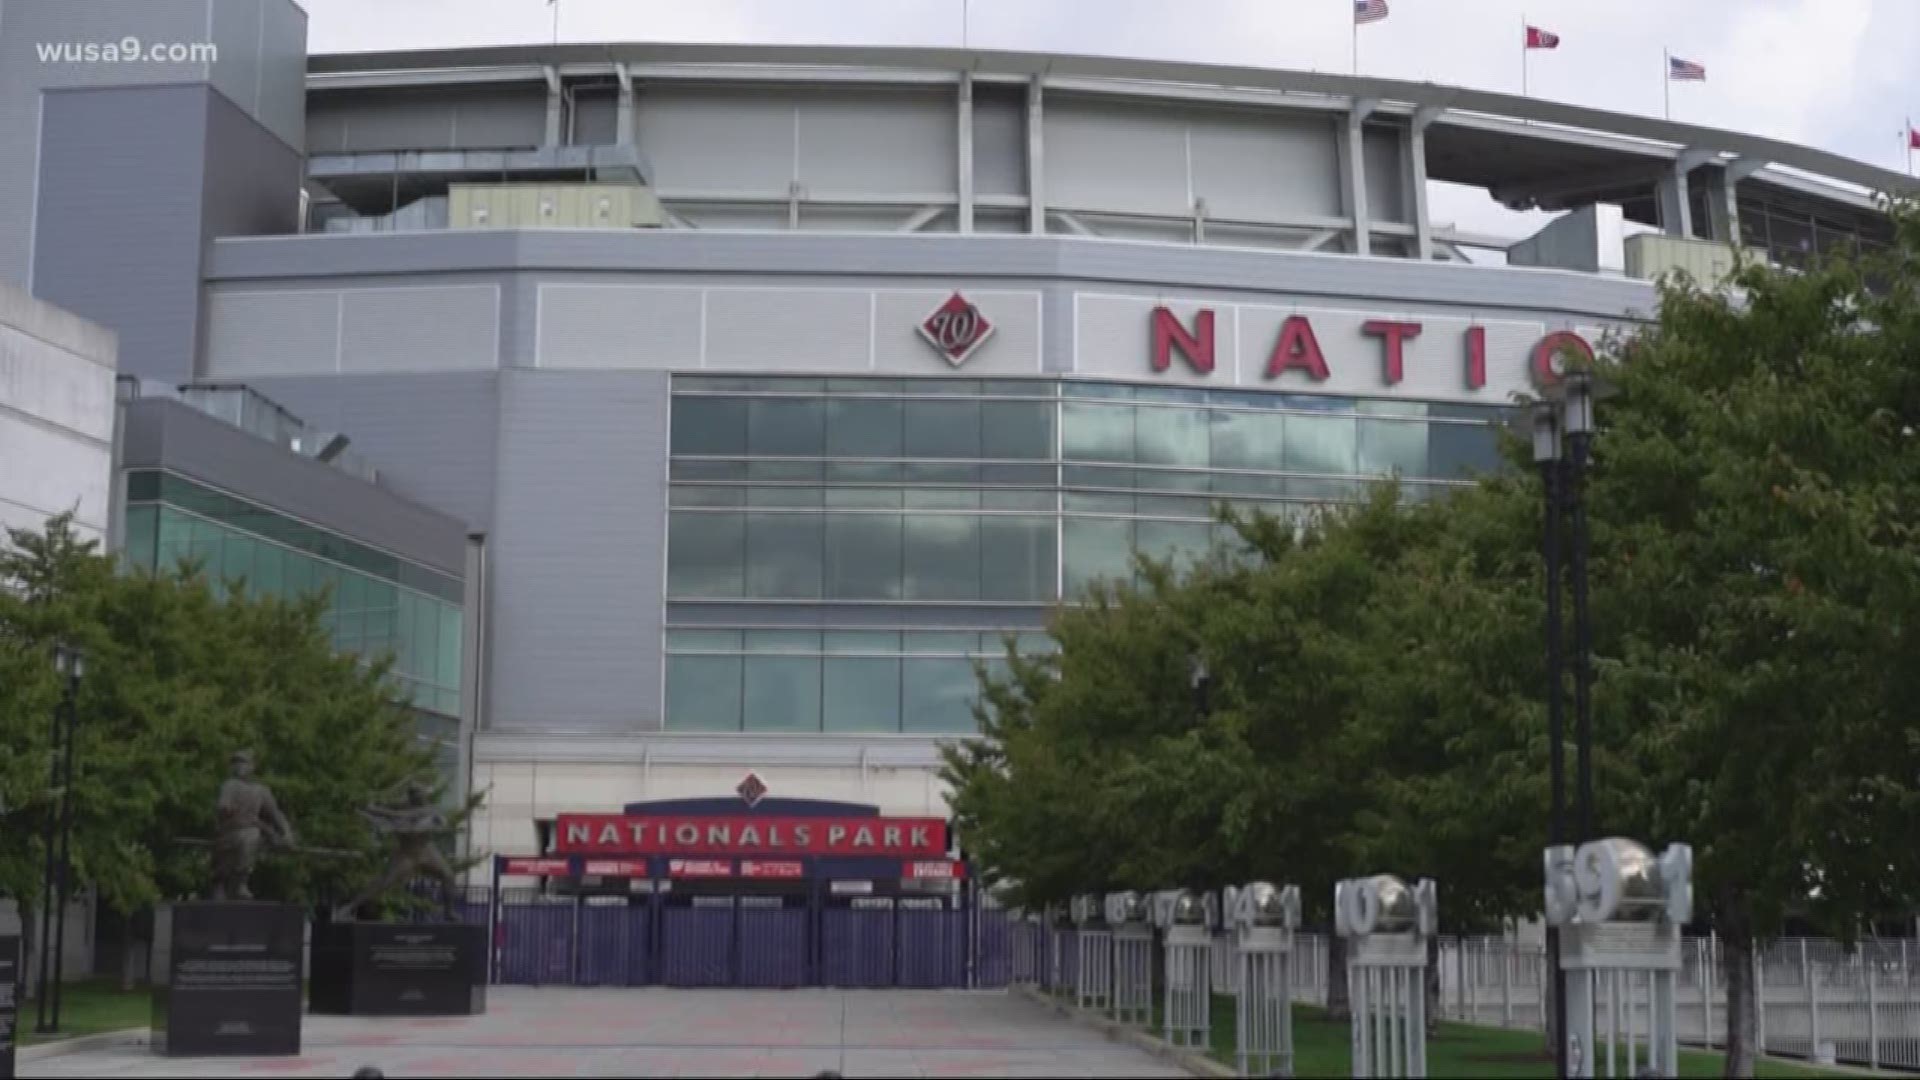 Former DC Mayor Tony Williams looks back at his push to build Nationals Park with public funding.